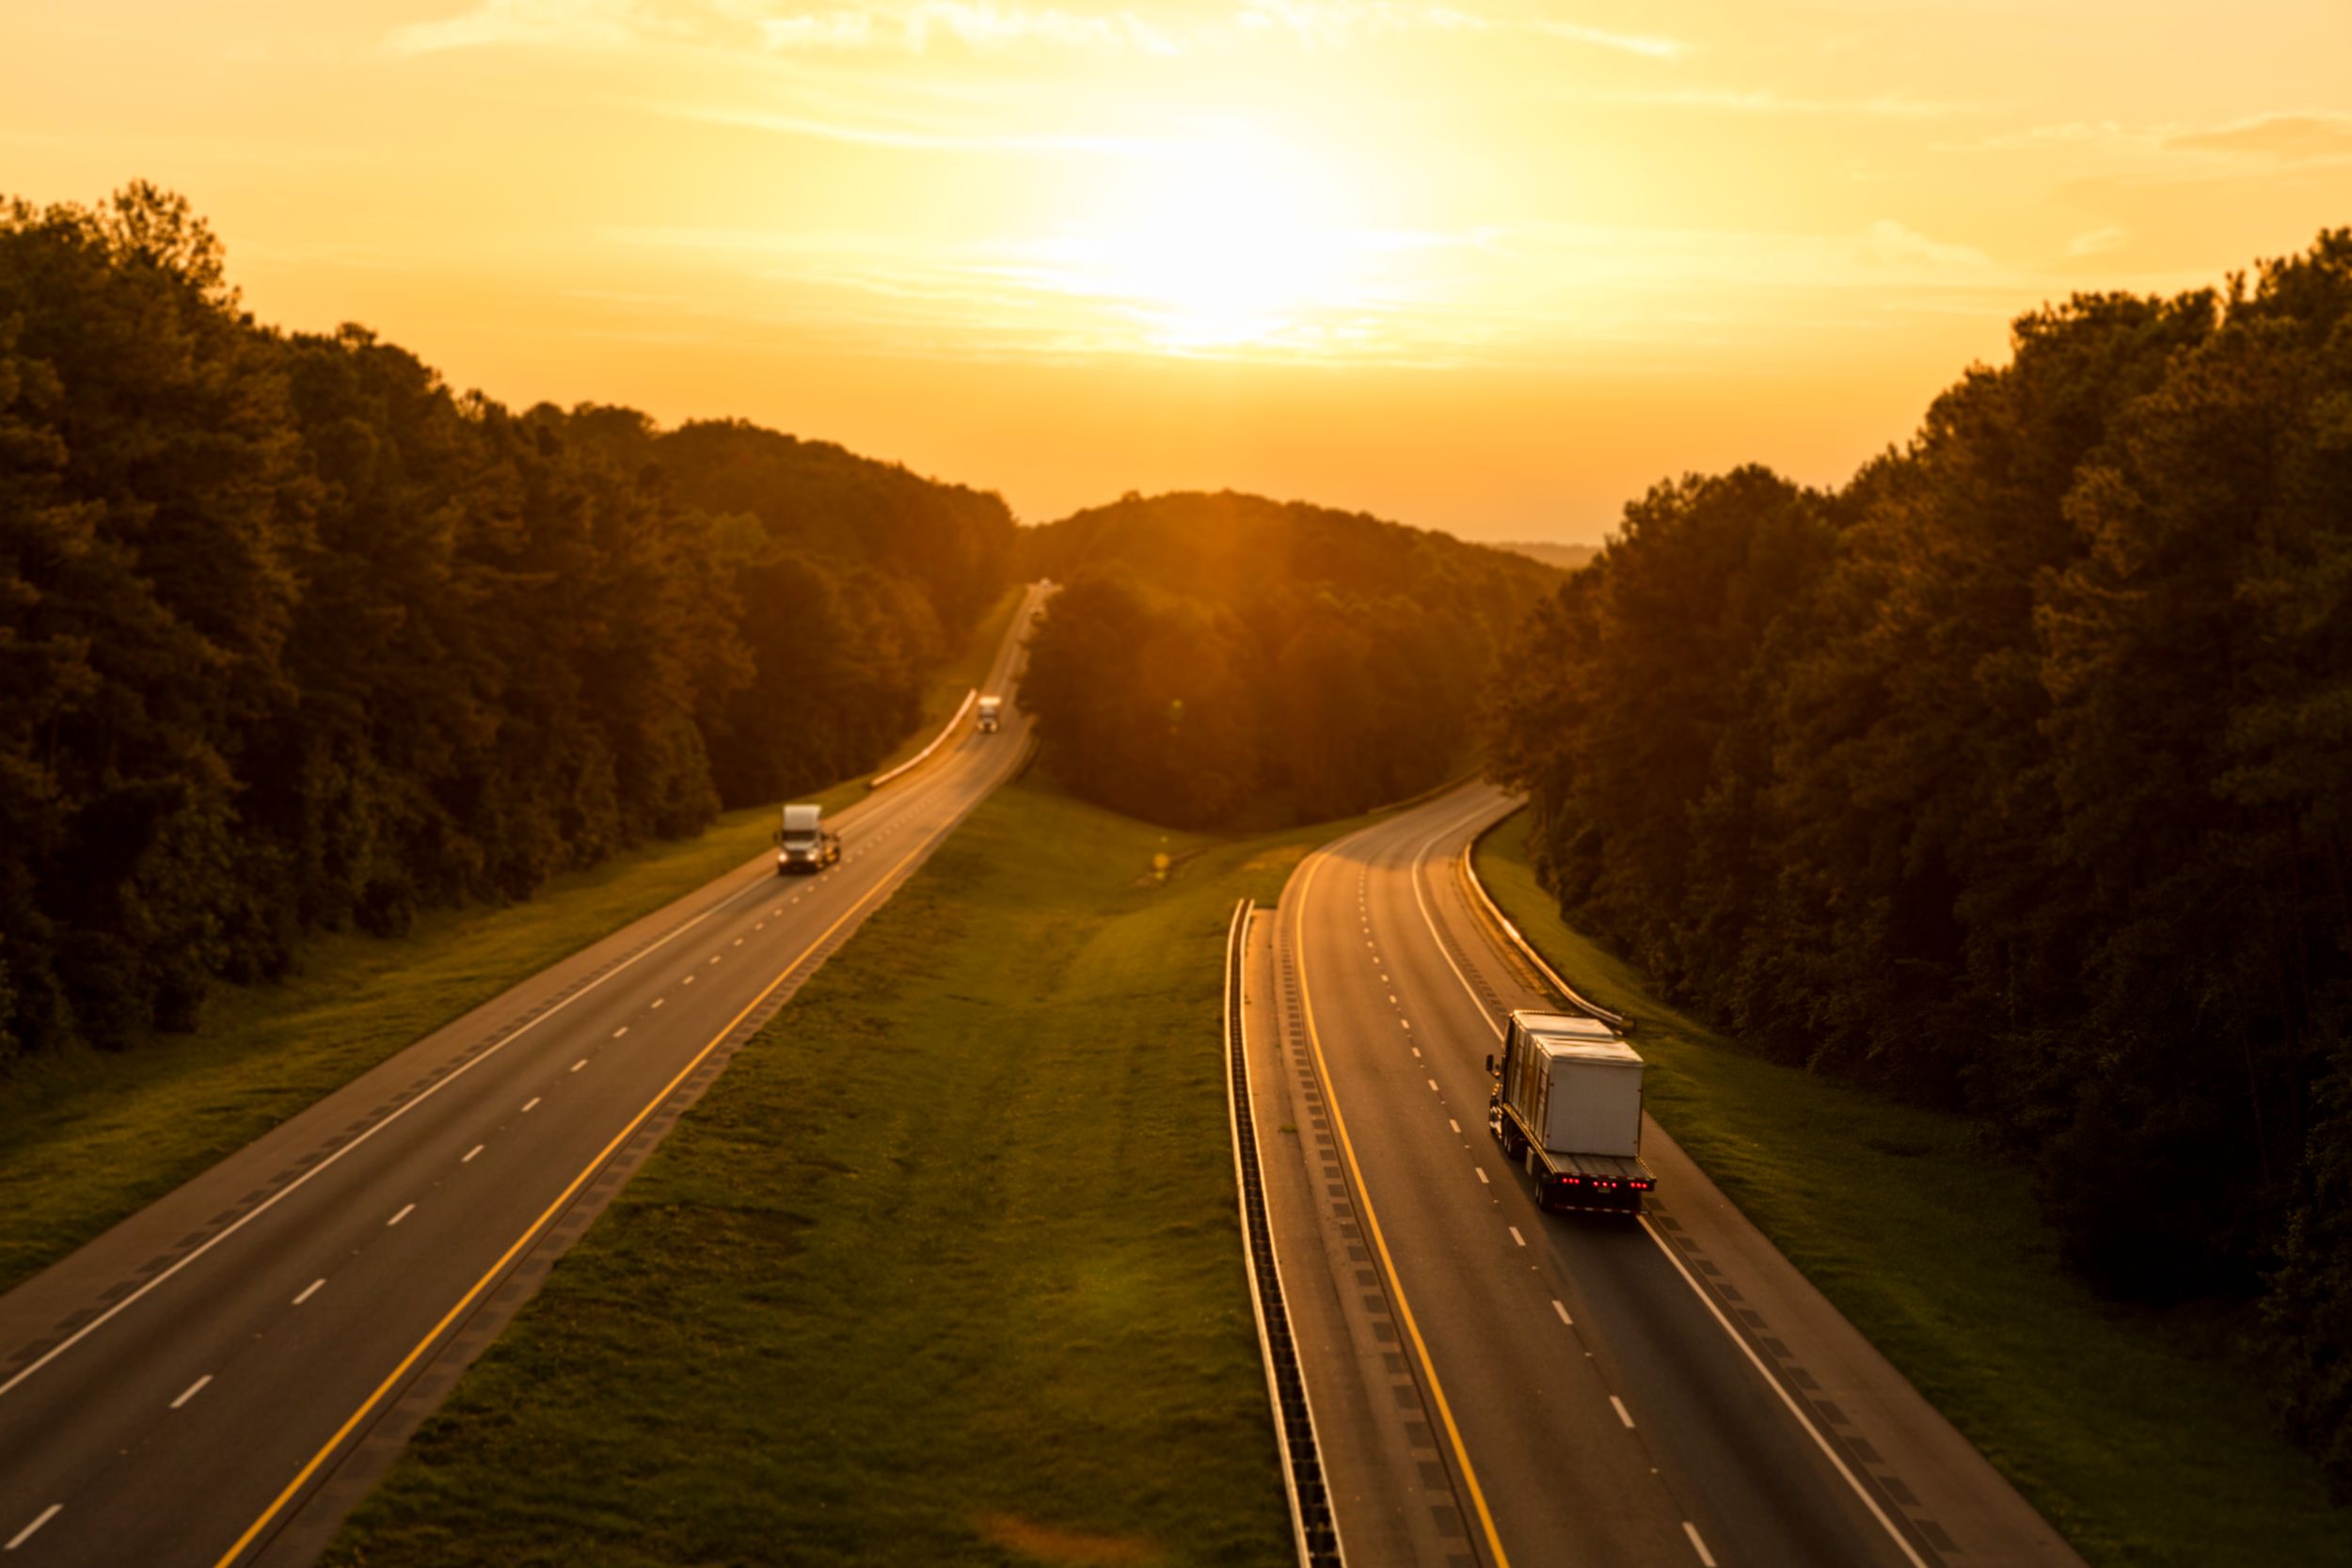 Sunset view of roadway with cars